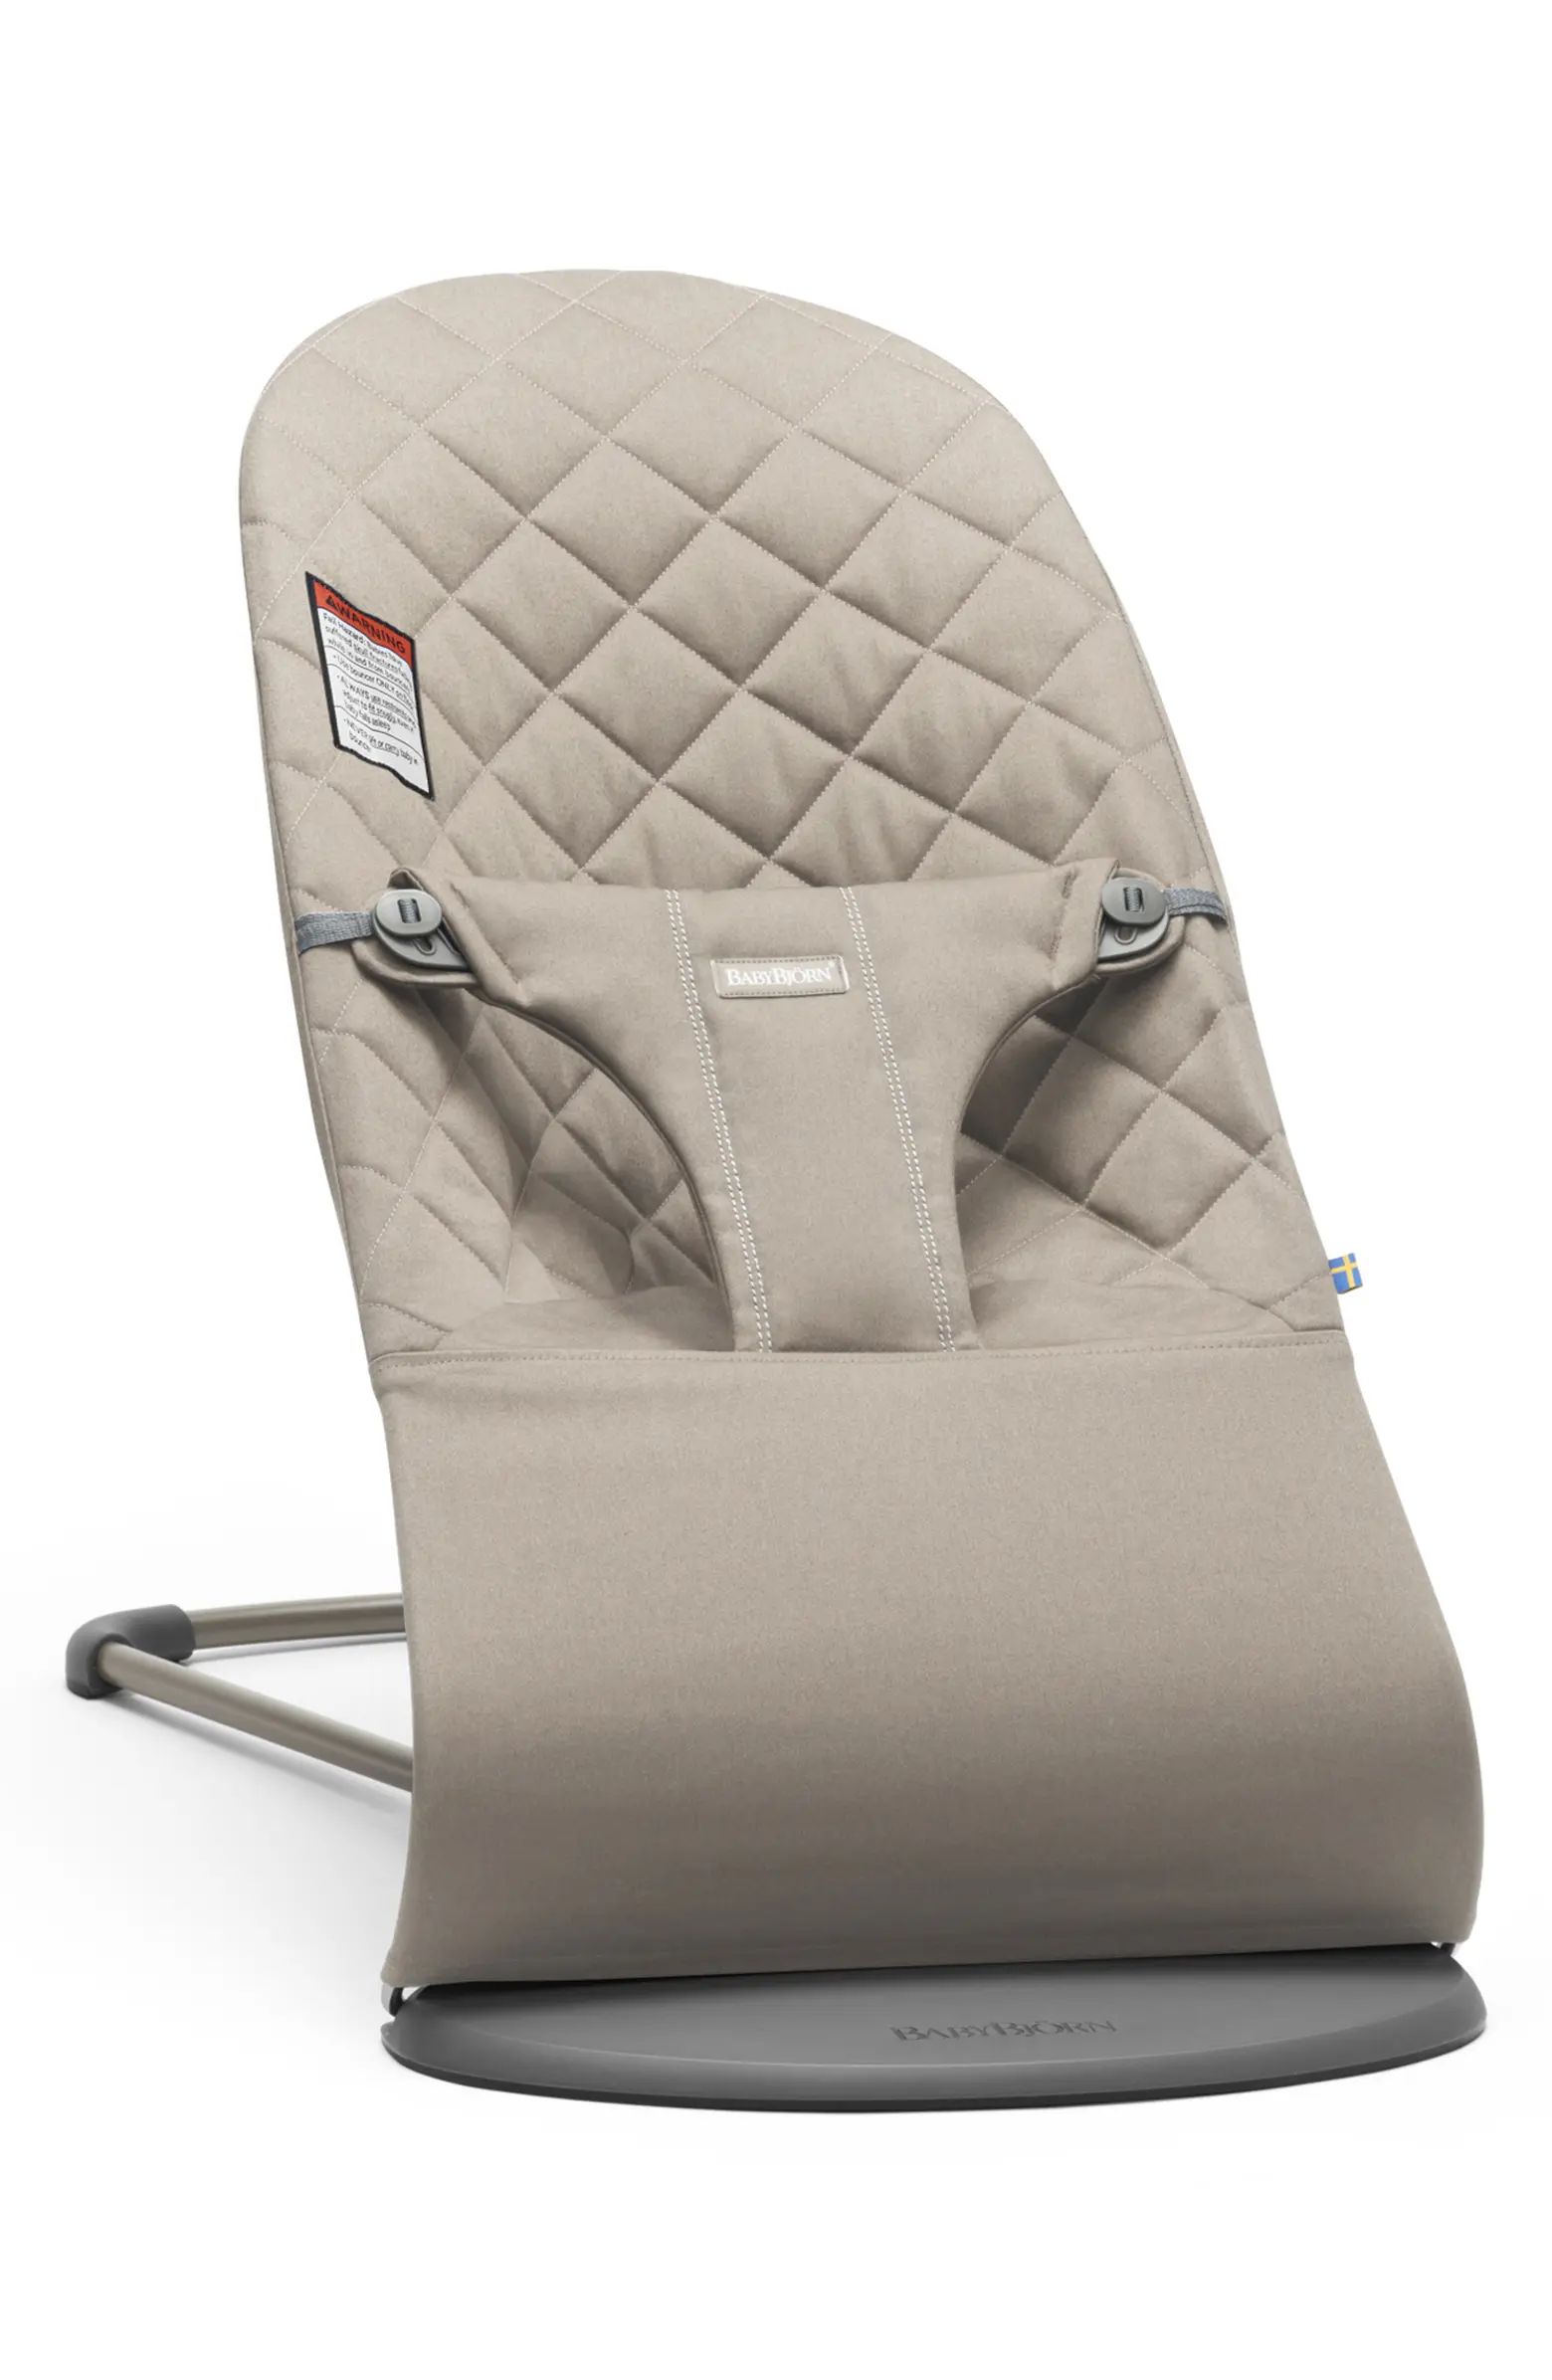 BabyBjörn Bouncer Bliss Convertible Quilted Baby Bouncer | Nordstrom | Nordstrom